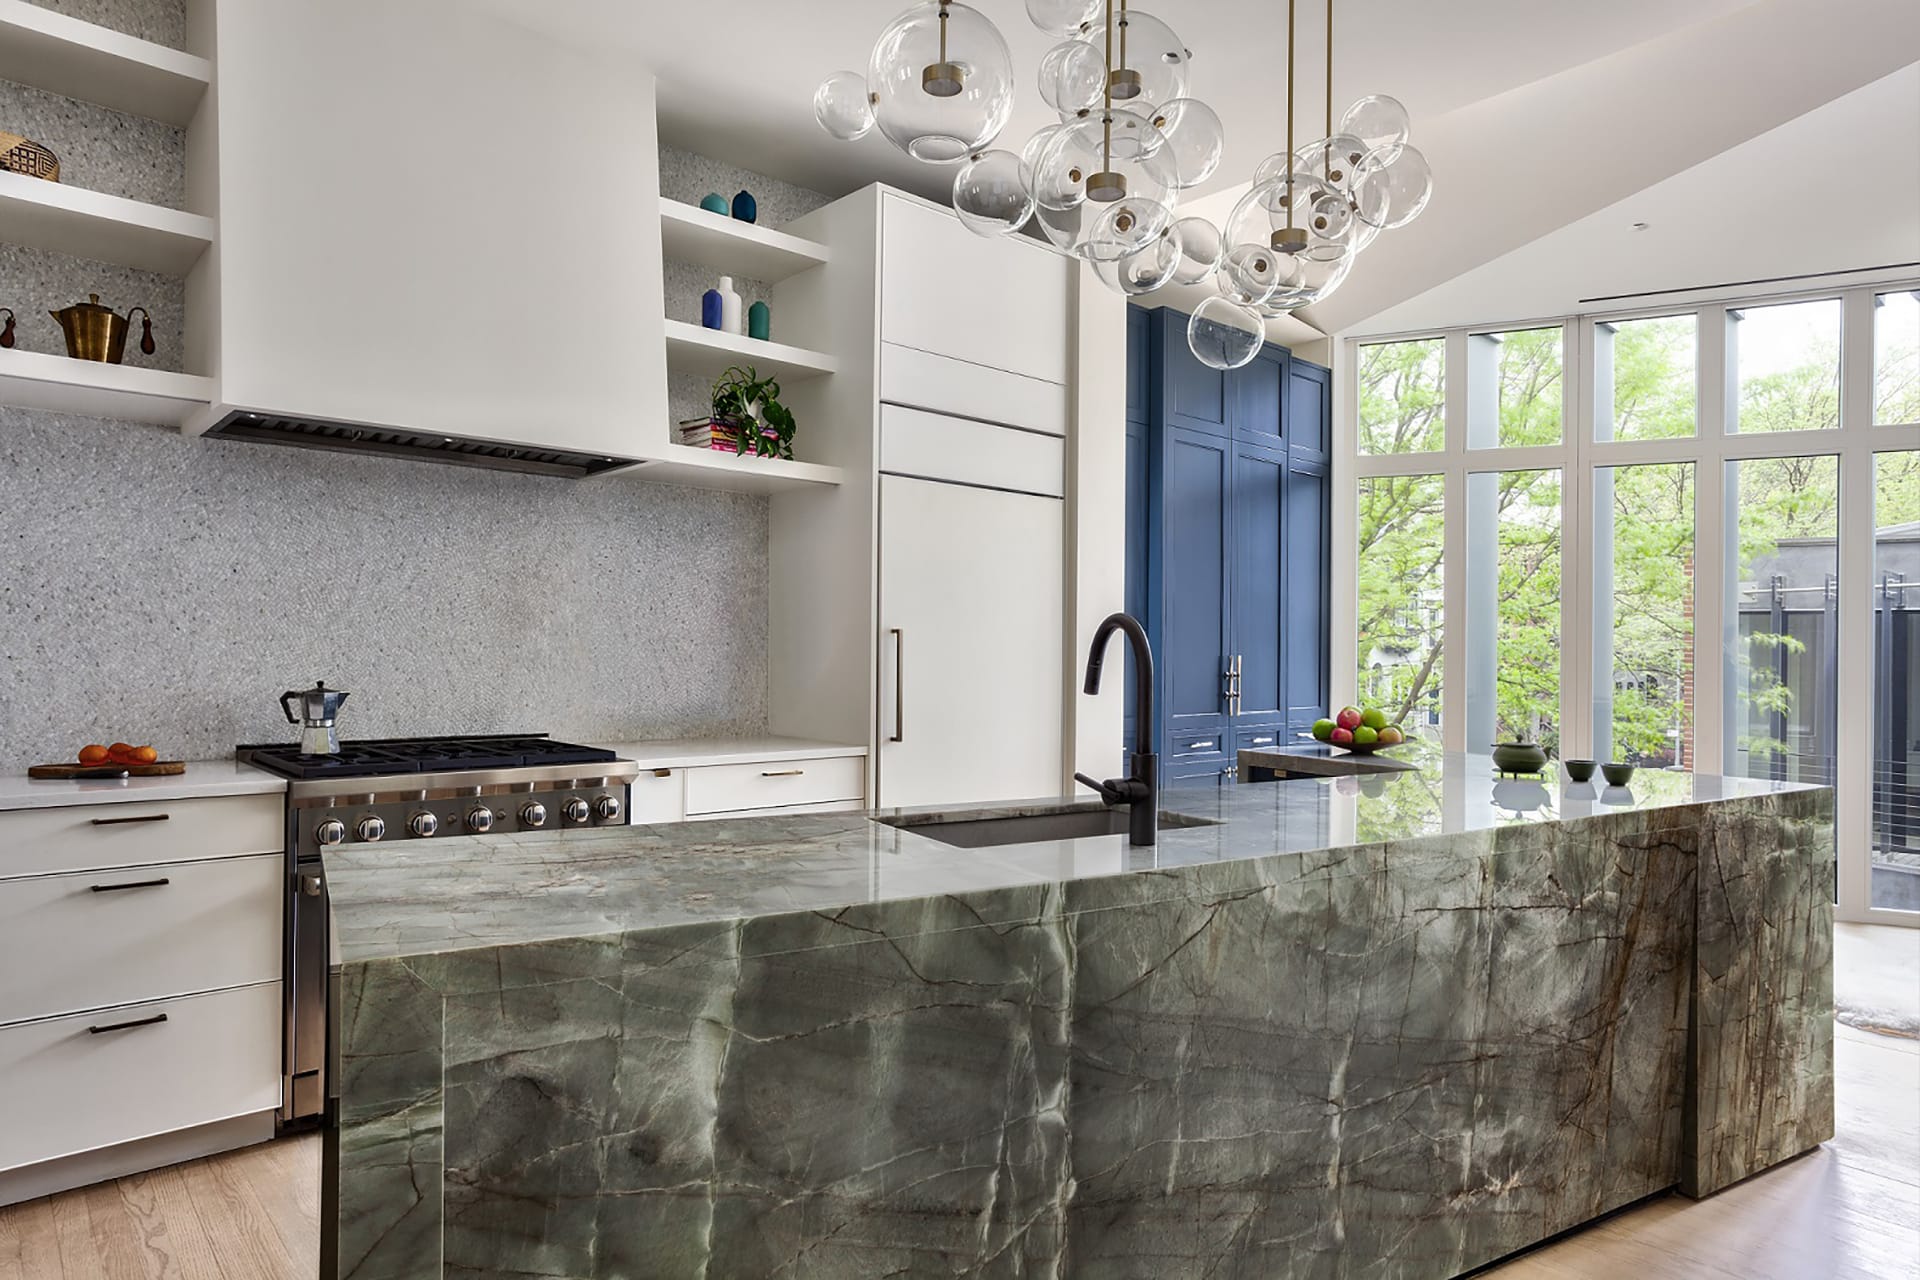 Kitchen in a Park Slope townhome with a large marble island, blue cabinetry, and bubble light fixture